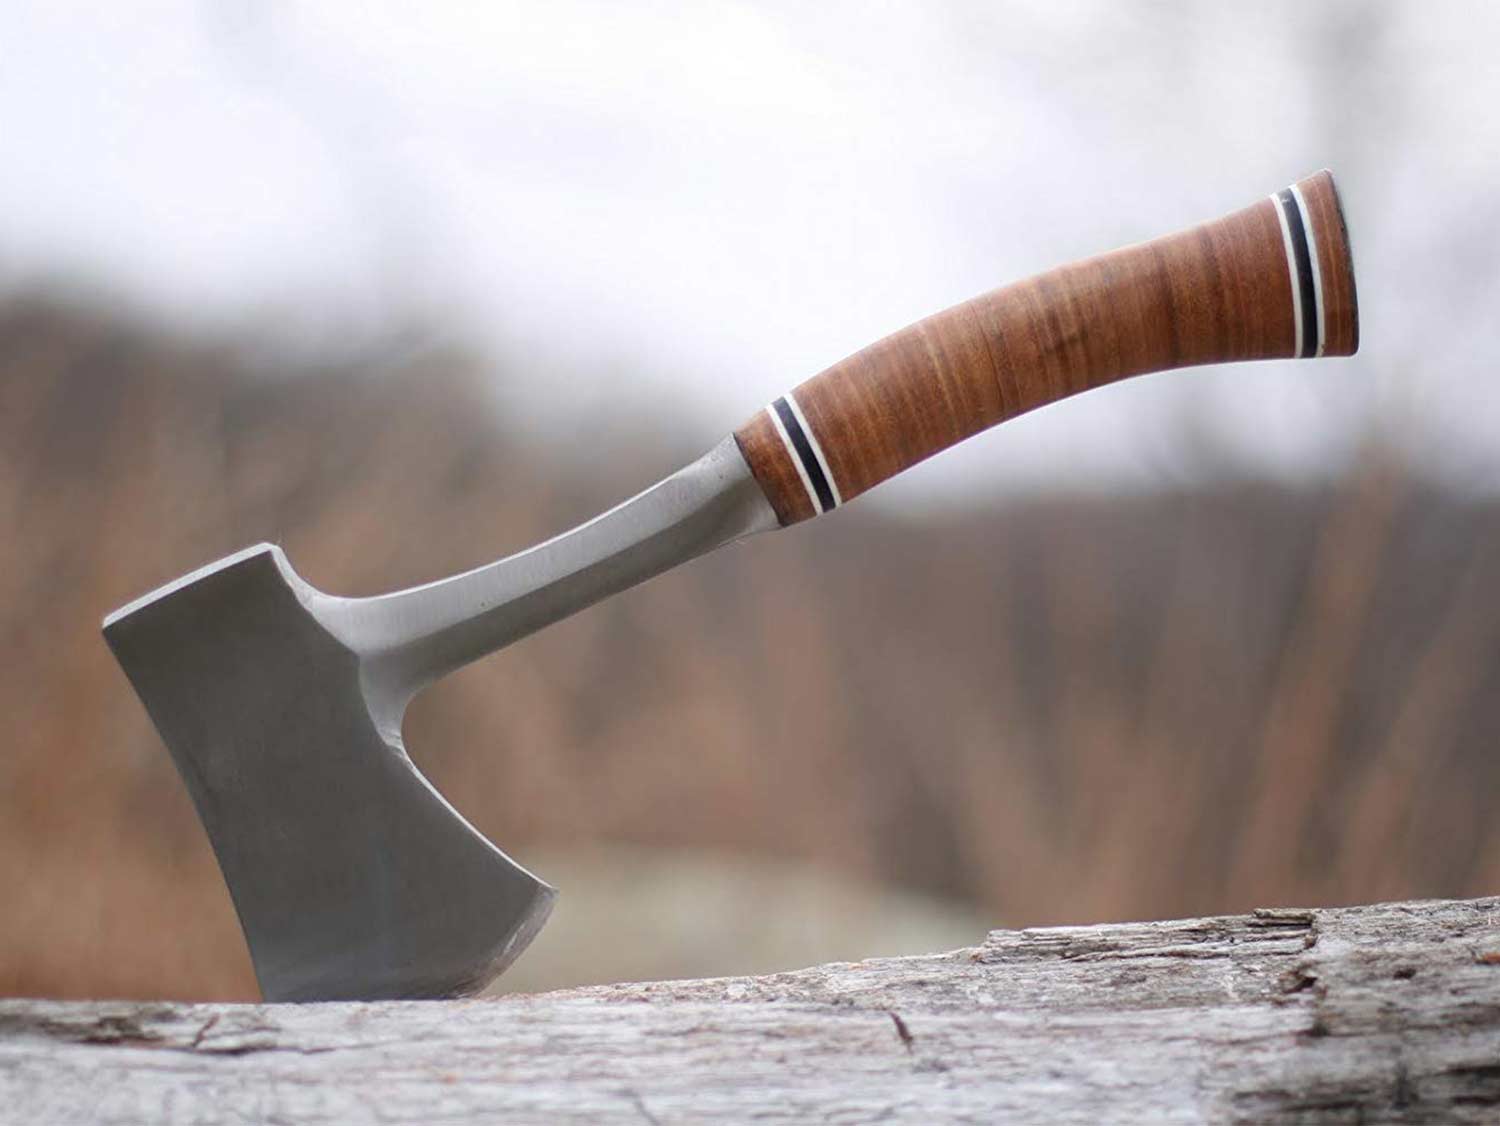 3 Things to Consider Before Buying Your Next Hatchet